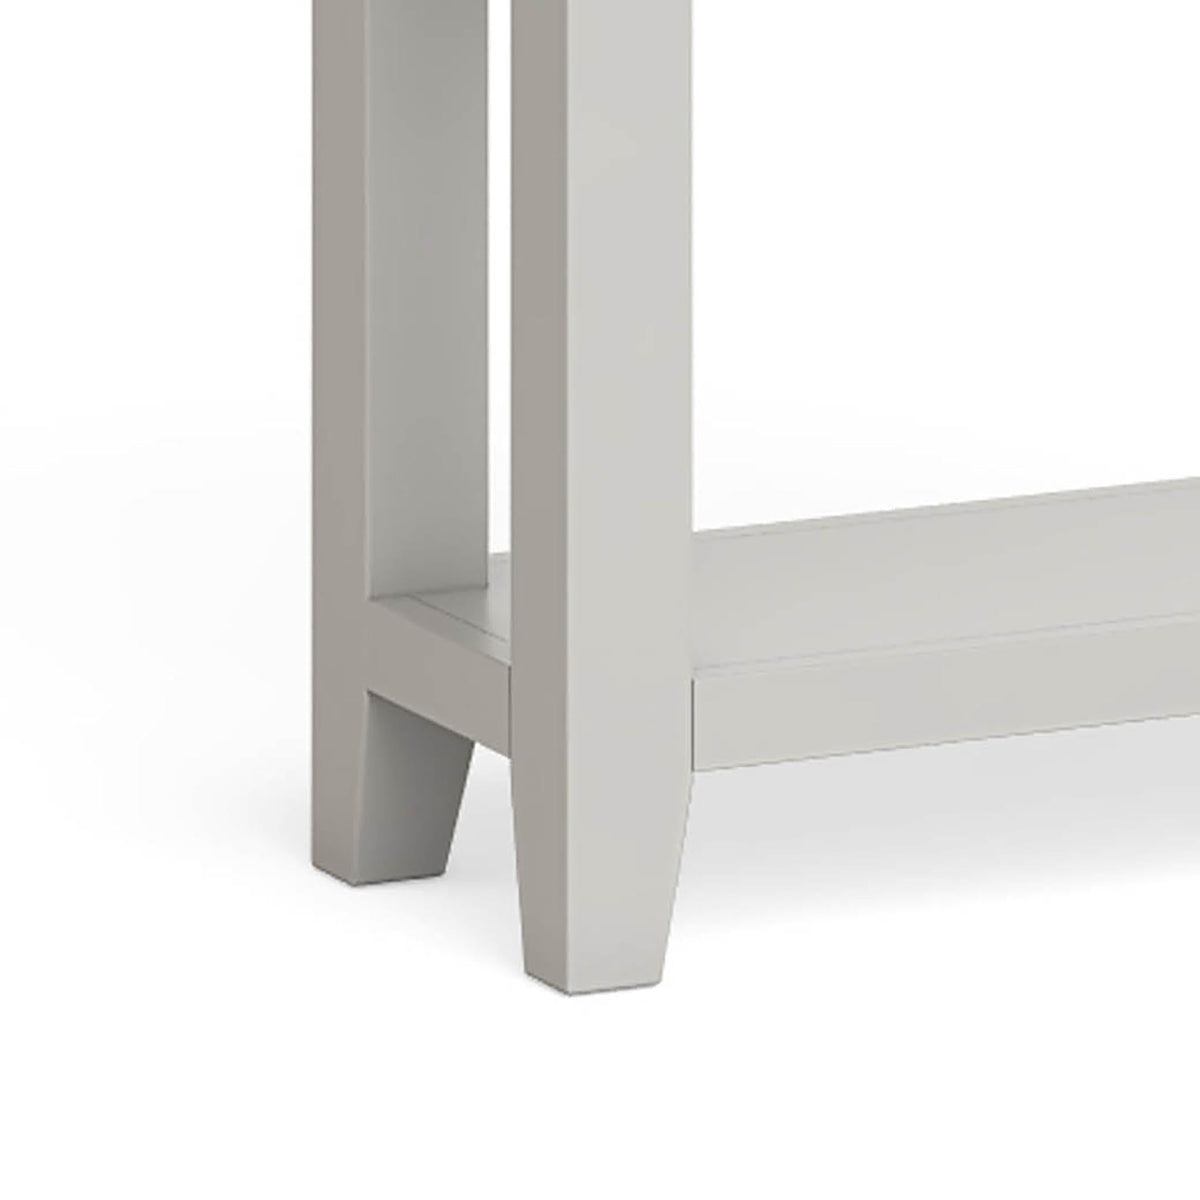 Lundy Grey Console Table - Close Up of Legs of Unit